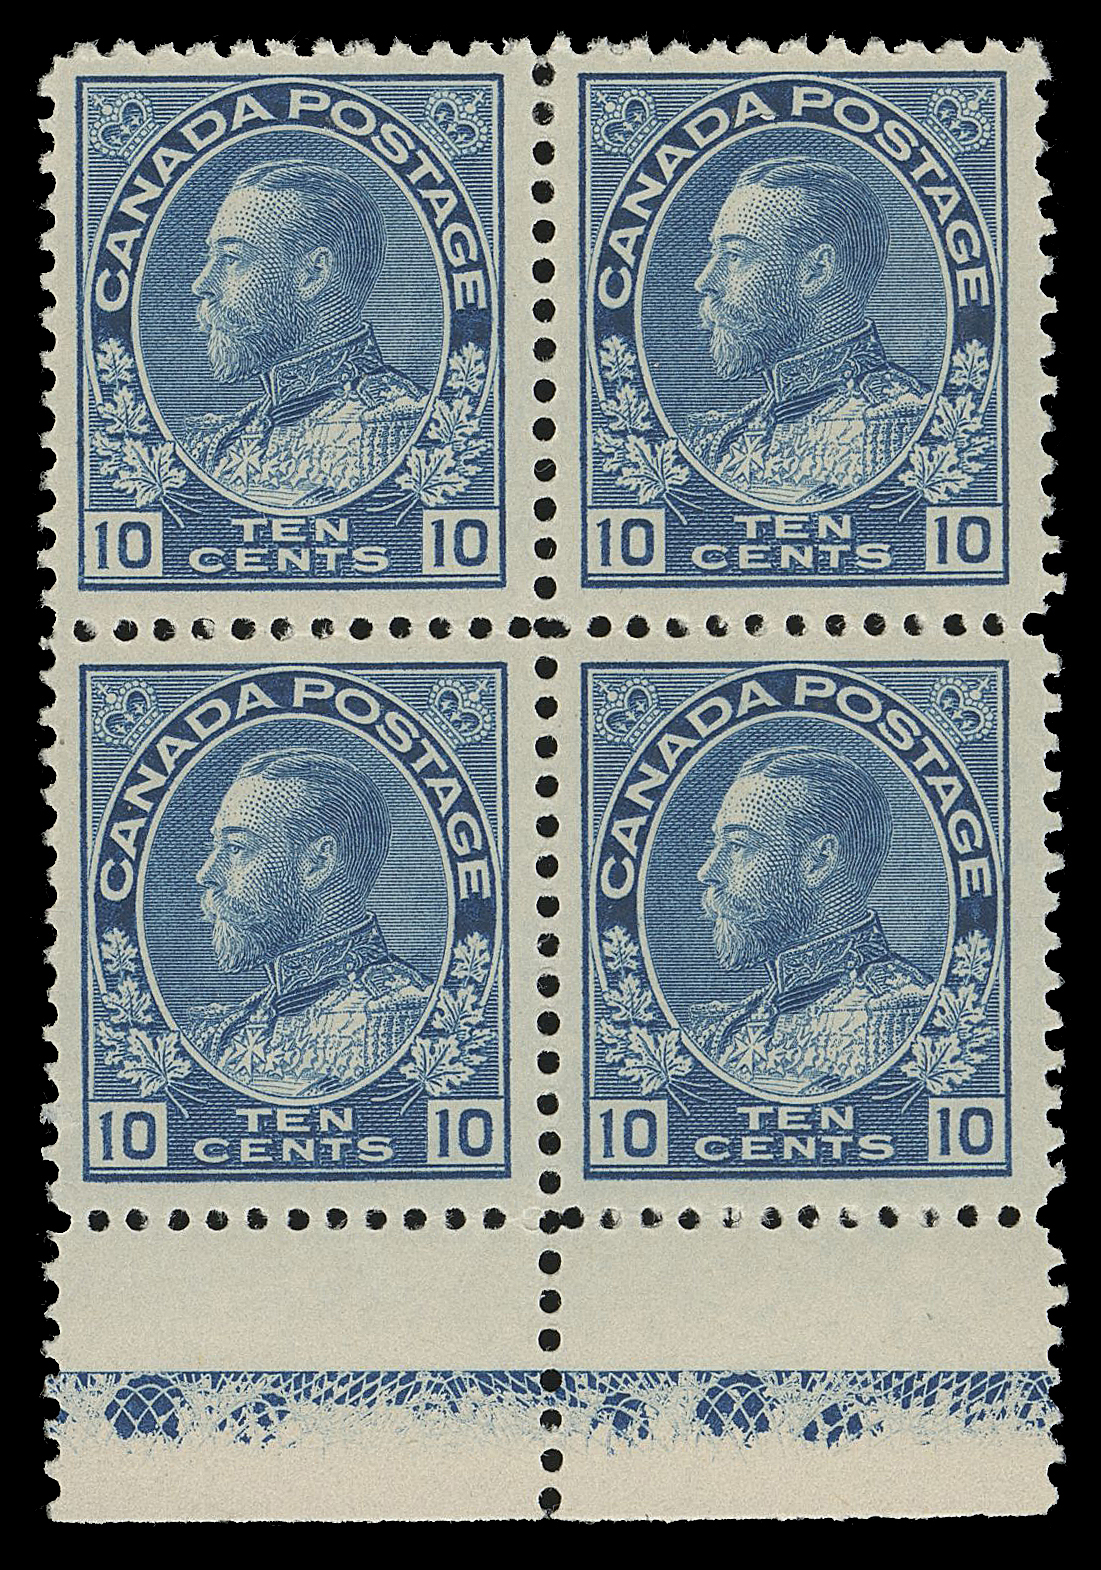 ADMIRAL STAMPS  117a,A superbly centered mint block showing Type D lathework of usual 40% strength, the lower pair with lathework margin is NH. An attractive block in superior condition, XF LH (Unitrade cat. as two NH lathework singles)